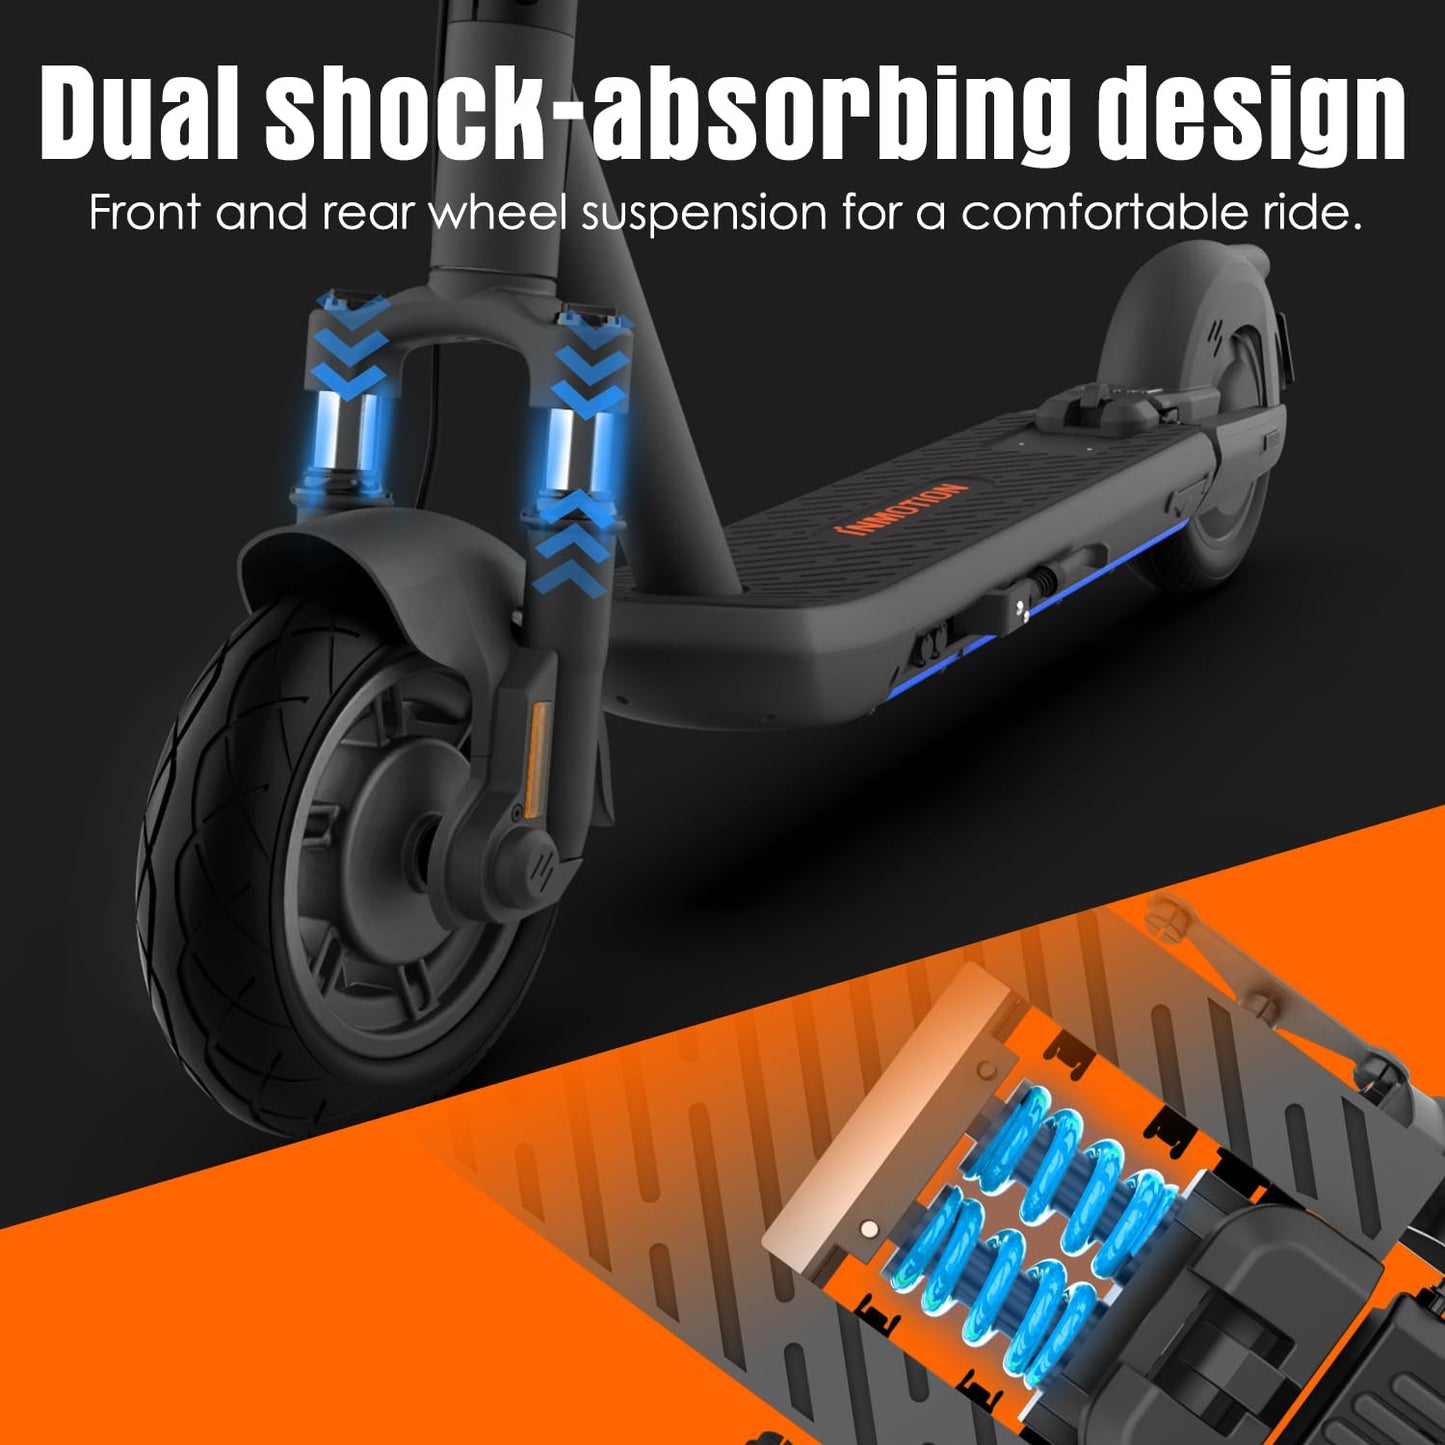 Scooter for Big and Tall People - Heavy Duty Electric Scooter for Adults 300lbs - INMOTION S1F - Long Range Commuter E-scooter (25 MPH & 59 Miles)